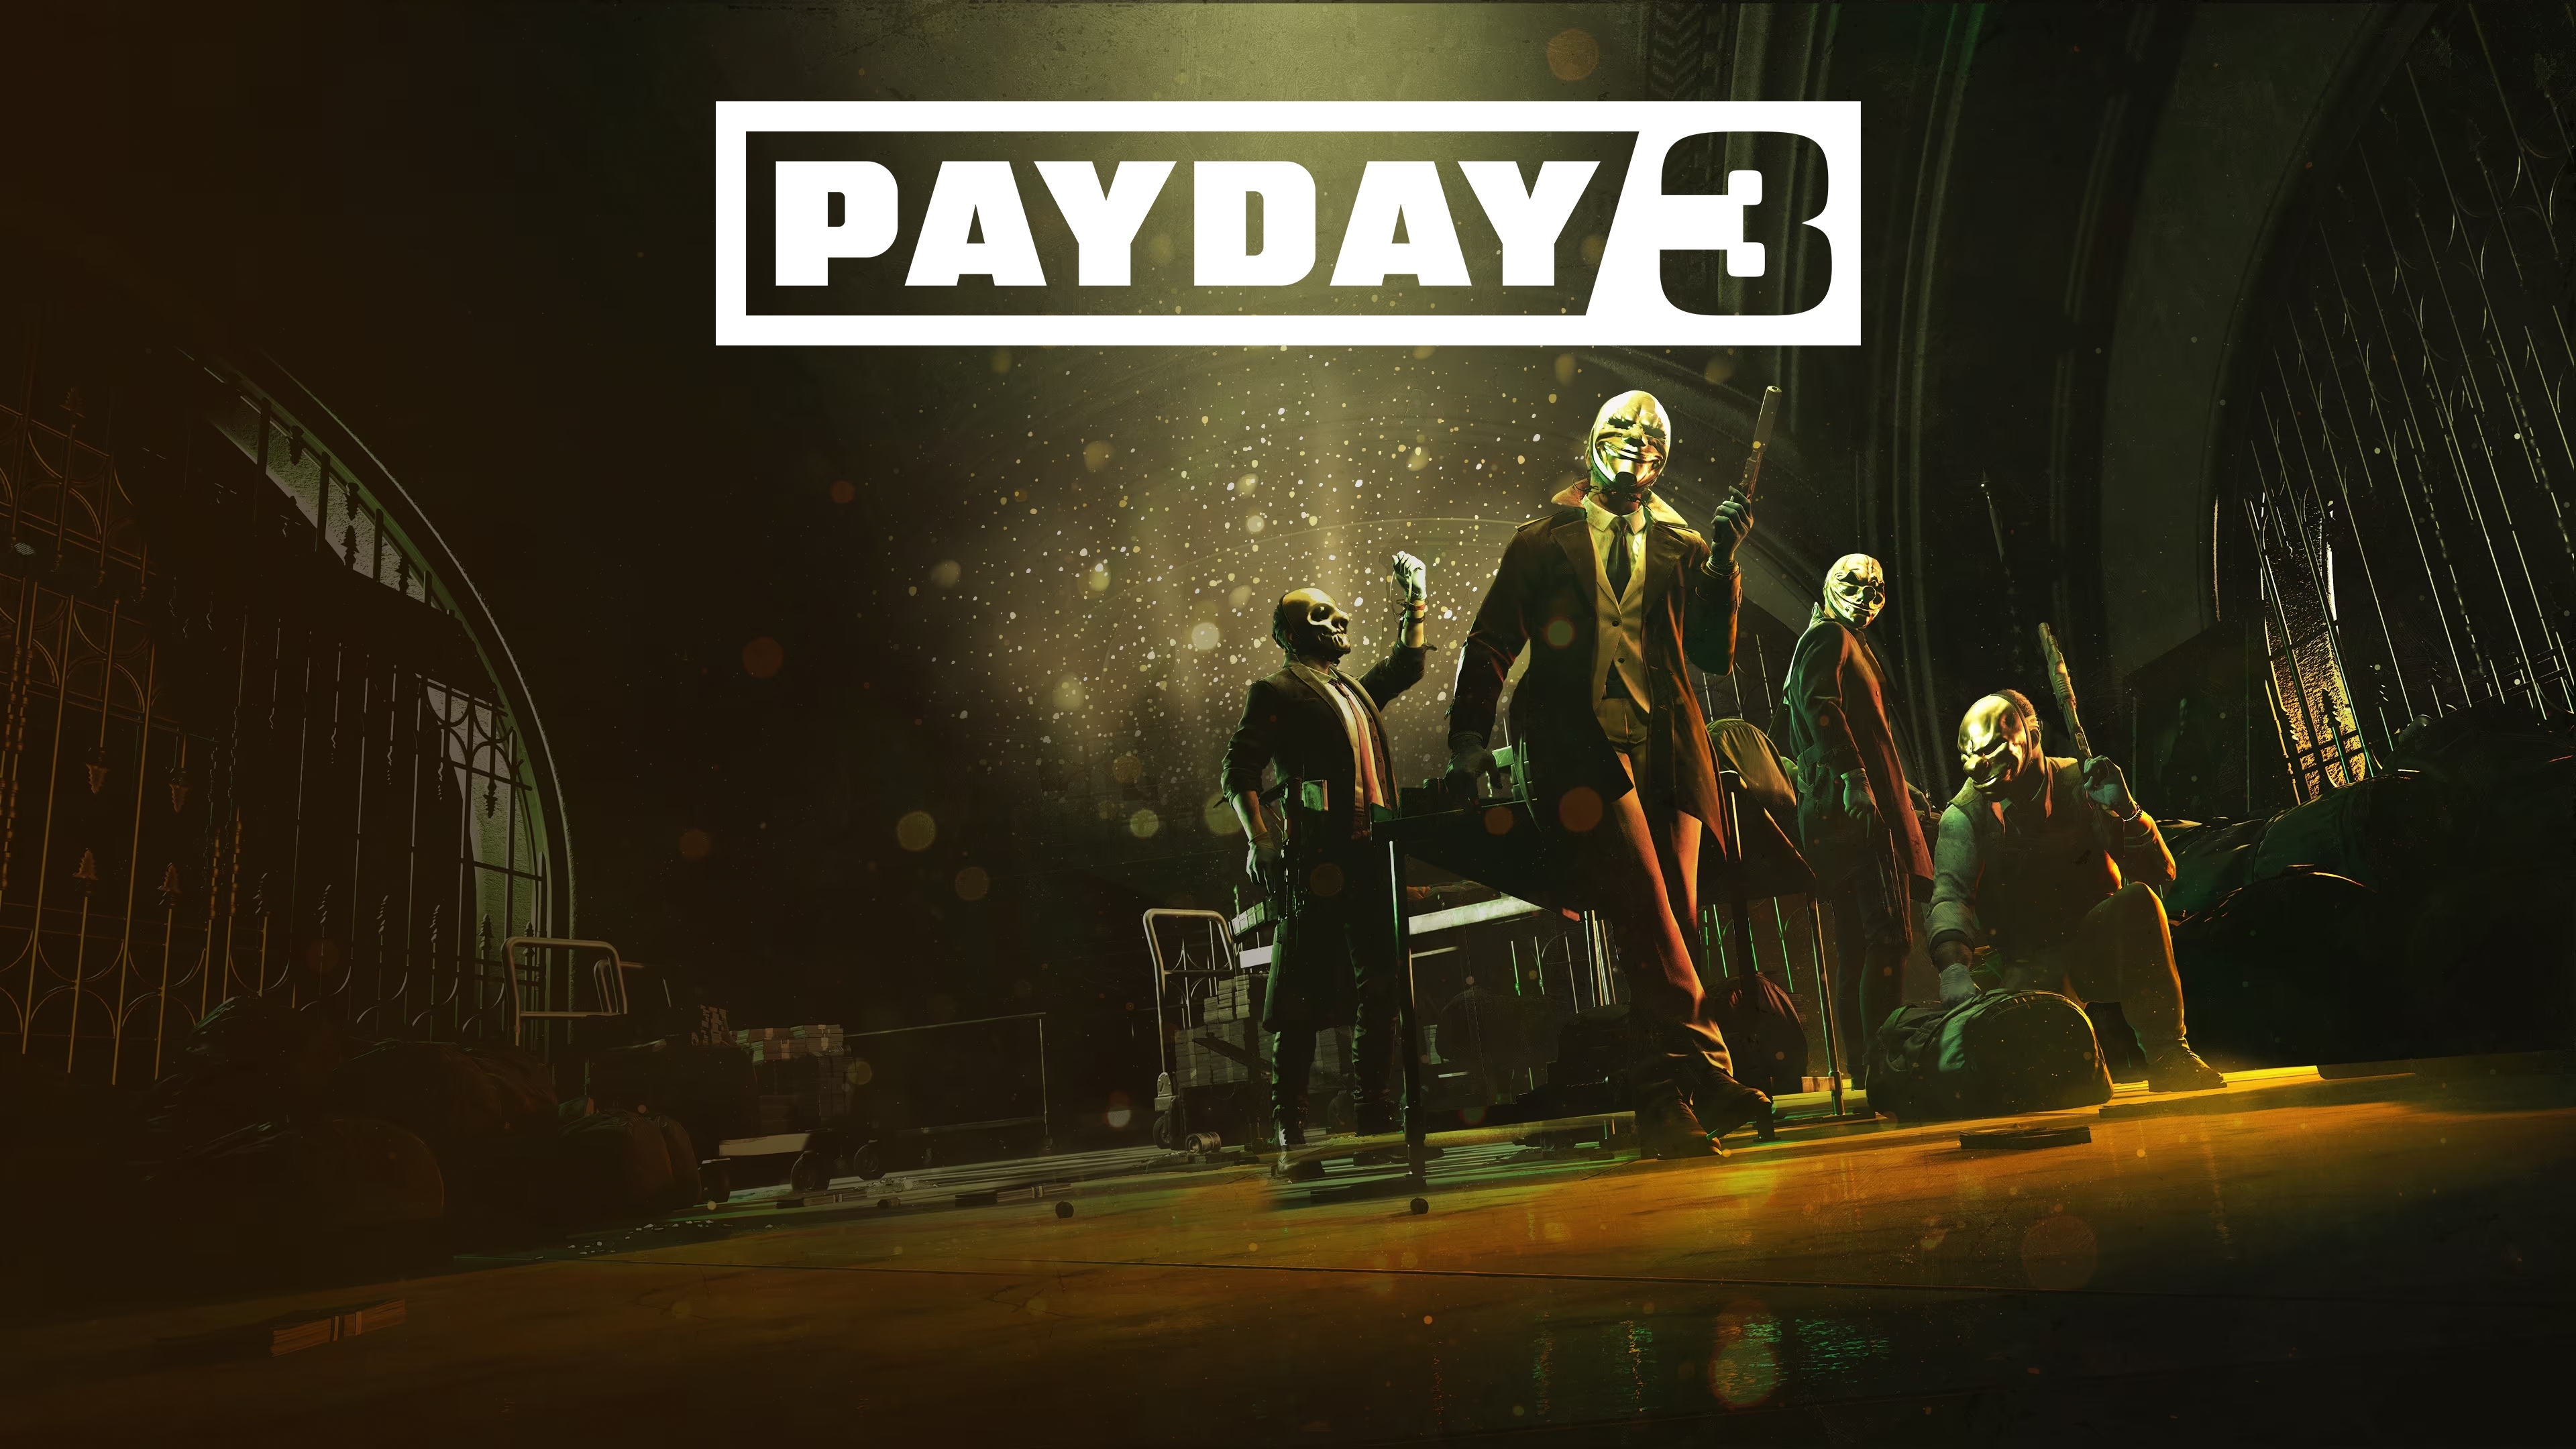 Payday 3 Gameplay on Xbox Series X in 4K